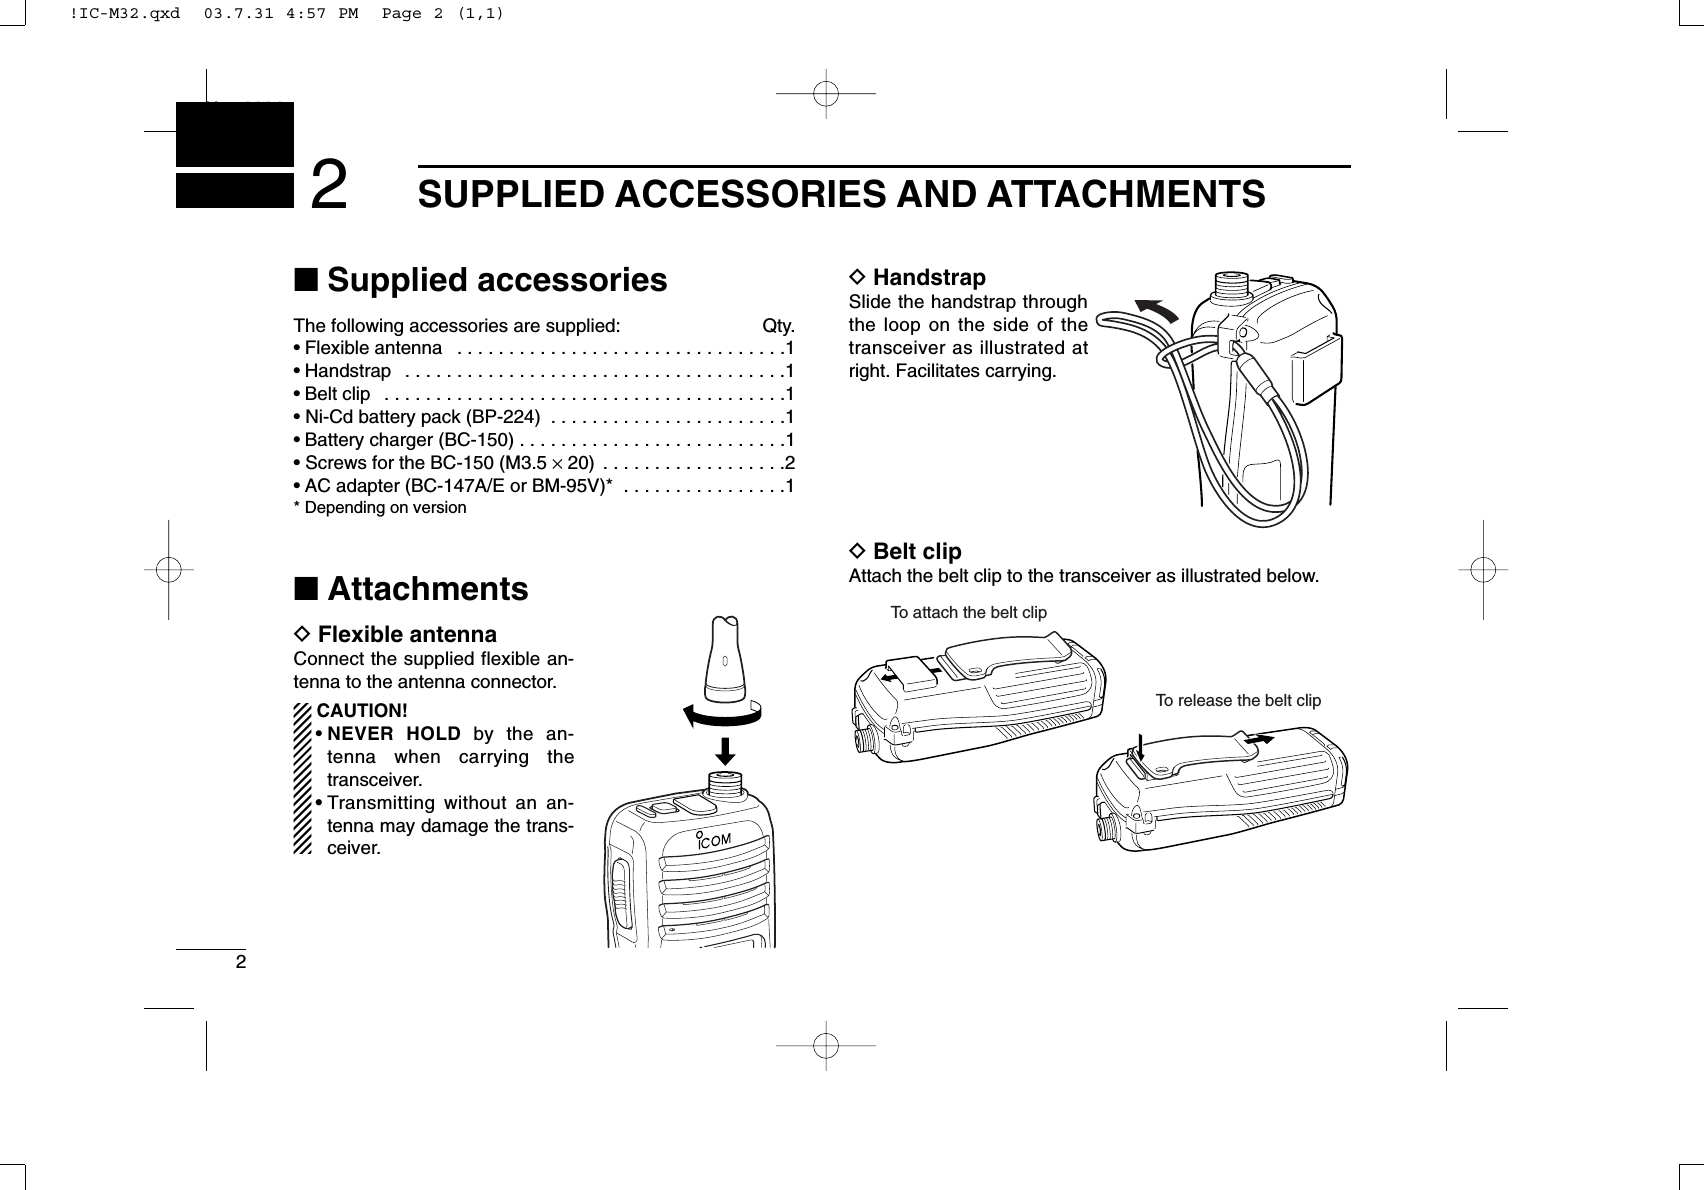 2SUPPLIED ACCESSORIES AND ATTACHMENTSNew20012■Supplied accessoriesThe following accessories are supplied: Qty.• Flexible antenna  . . . . . . . . . . . . . . . . . . . . . . . . . . . . . . . .1• Handstrap  . . . . . . . . . . . . . . . . . . . . . . . . . . . . . . . . . . . . .1• Belt clip  . . . . . . . . . . . . . . . . . . . . . . . . . . . . . . . . . . . . . . .1• Ni-Cd battery pack (BP-224)  . . . . . . . . . . . . . . . . . . . . . . .1• Battery charger (BC-150) . . . . . . . . . . . . . . . . . . . . . . . . . .1• Screws for the BC-150 (M3.5 ×20)  . . . . . . . . . . . . . . . . . .2• AC adapter (BC-147A/E or BM-95V)*  . . . . . . . . . . . . . . . .1* Depending on version■AttachmentsDFlexible antennaConnect the supplied flexible an-tenna to the antenna connector.CAUTION!• NEVER HOLD by the an-tenna when carrying thetransceiver.• Transmitting without an an-tenna may damage the trans-ceiver.DHandstrapSlide the handstrap throughthe loop on the side of thetransceiver as illustrated atright. Facilitates carrying.DBelt clipAttach the belt clip to the transceiver as illustrated below.To attach the belt clipTo release the belt clip!IC-M32.qxd  03.7.31 4:57 PM  Page 2 (1,1)